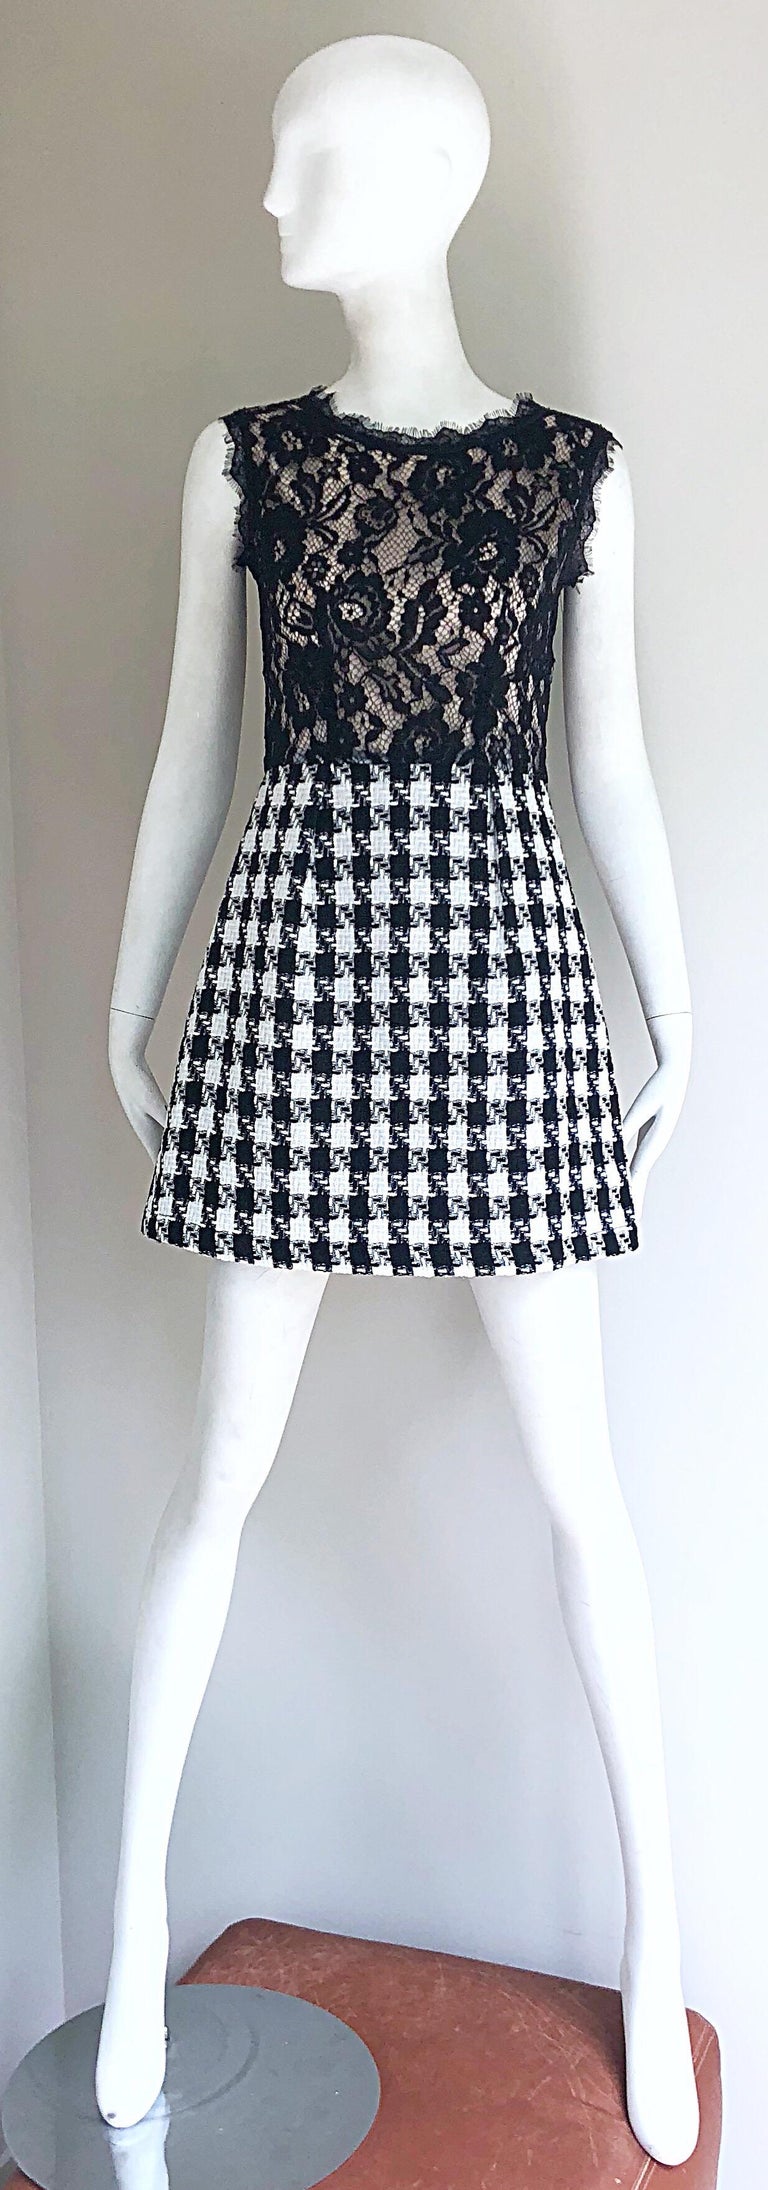 Marc Jacobs Early 2000s Black and White Lace Houndstooth Checkered Mini Dress For Sale 11